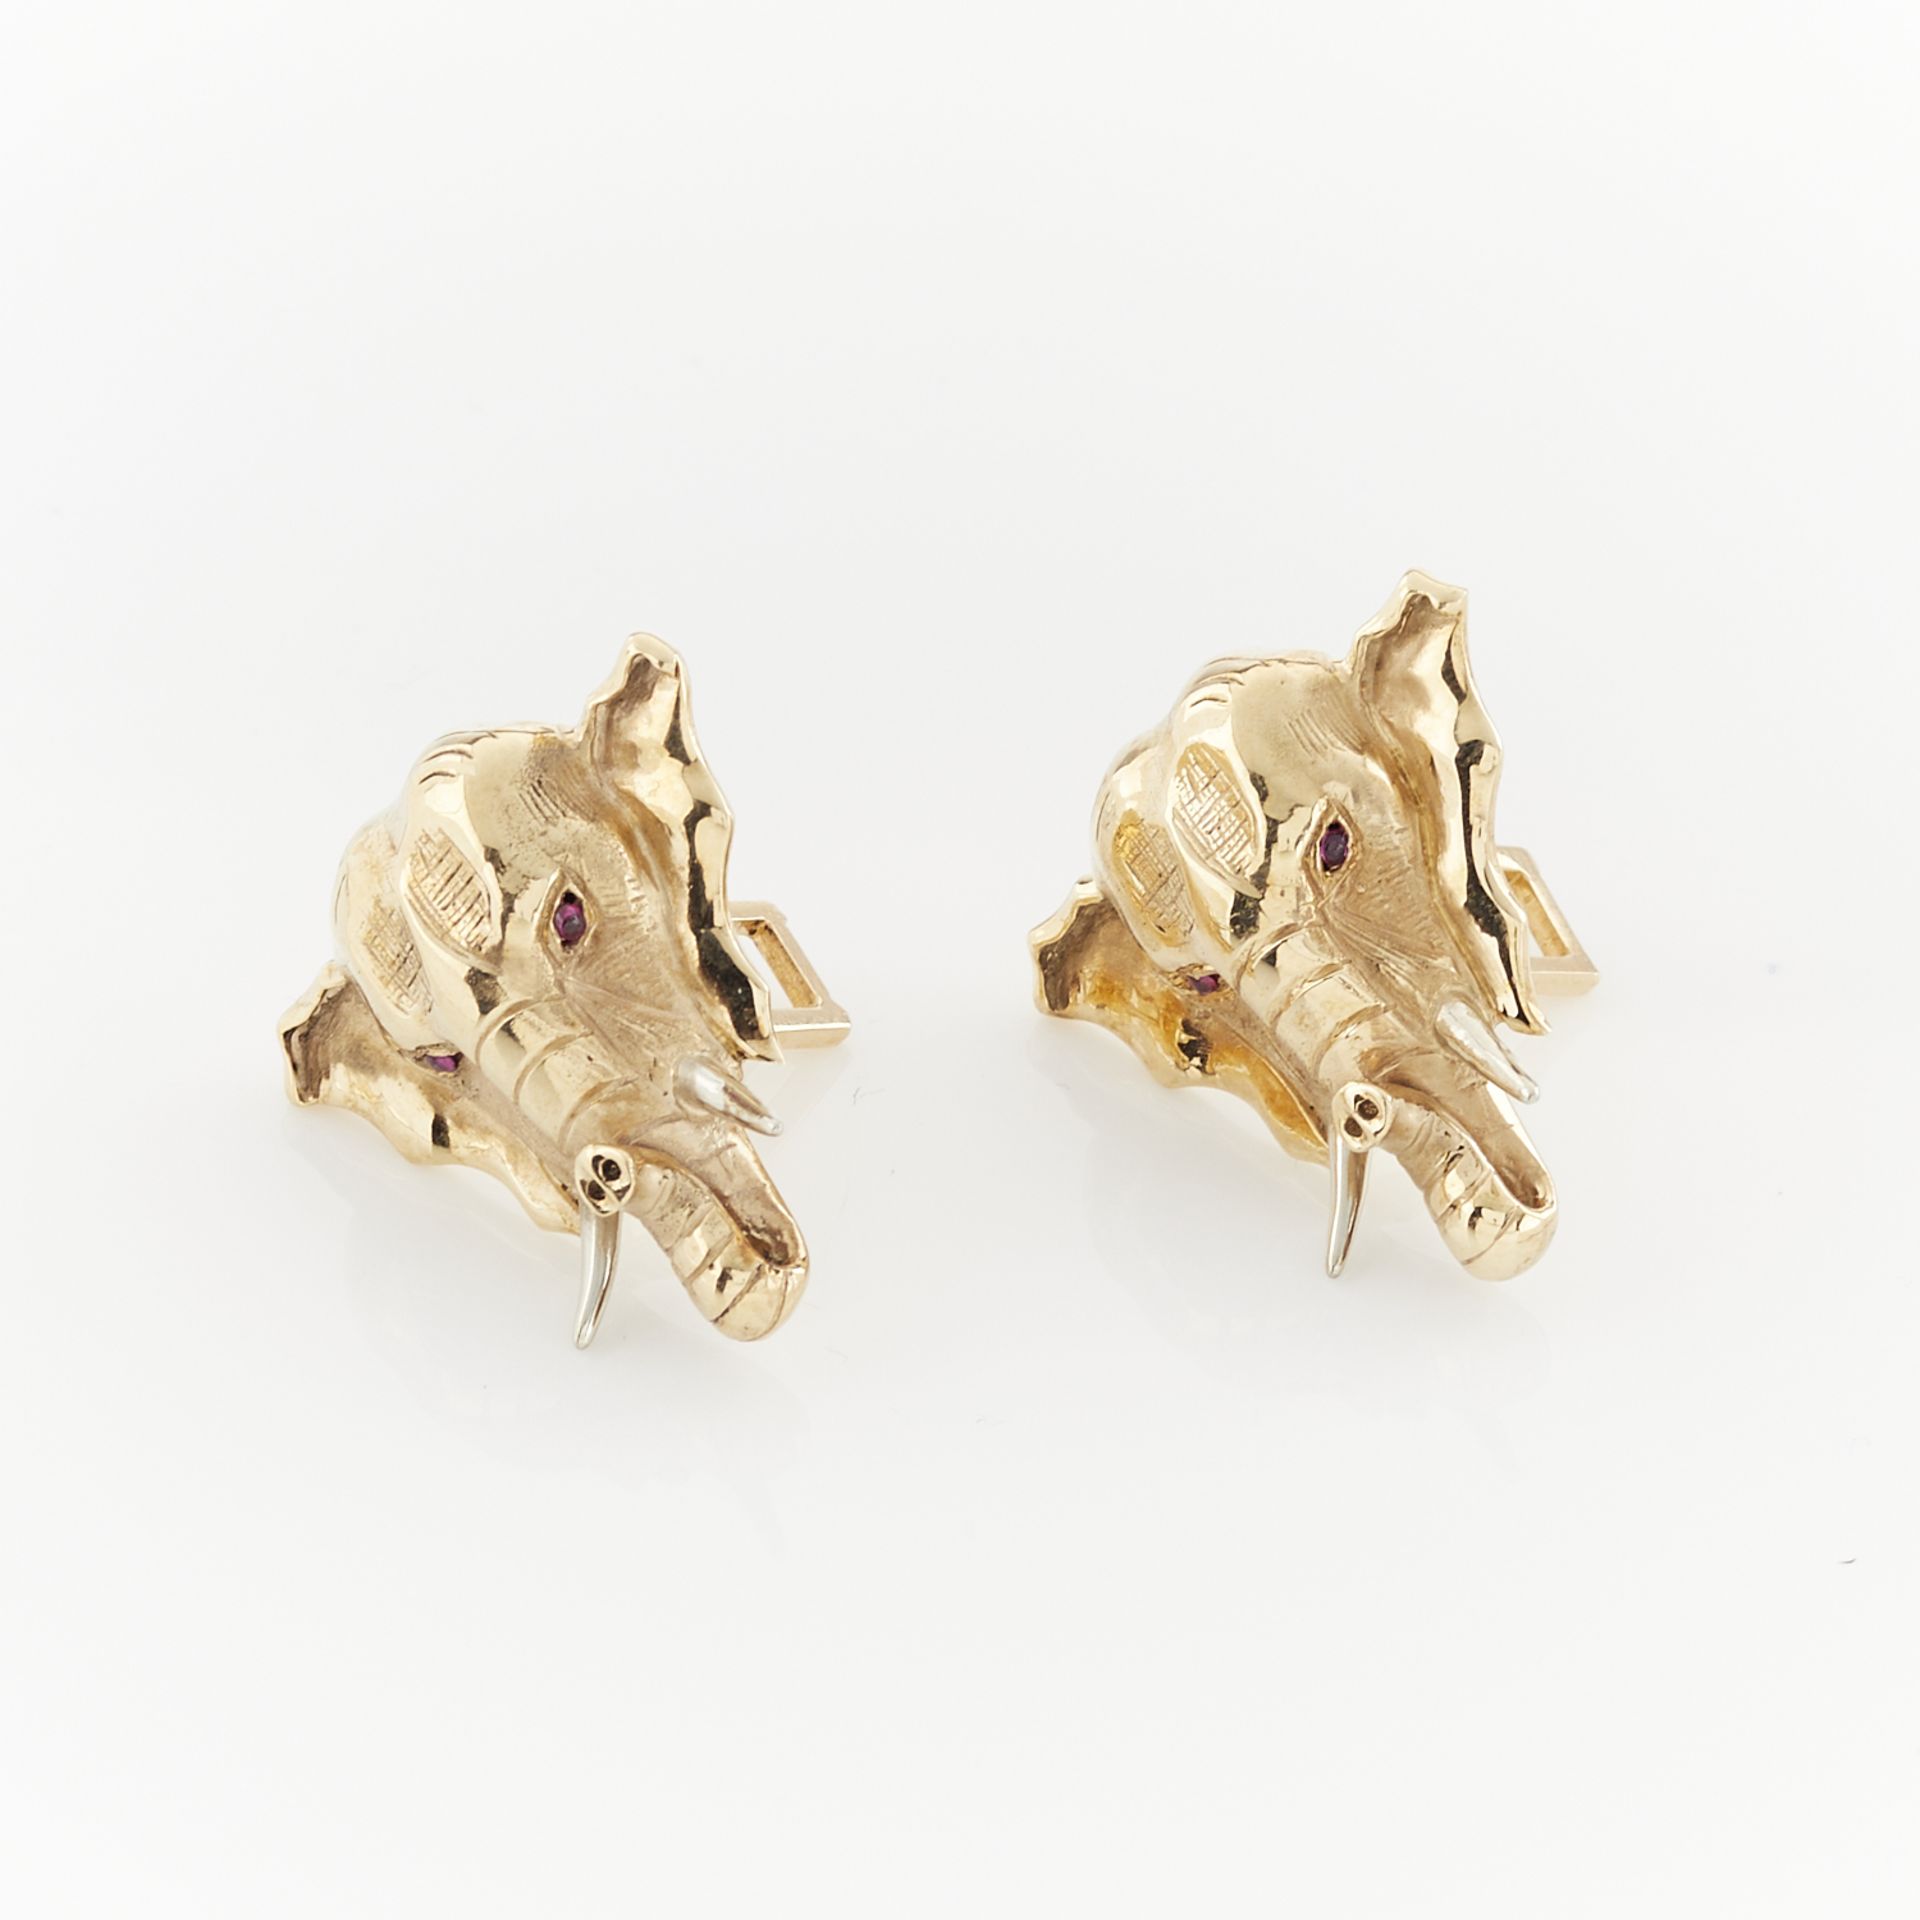 Pair of 14k Elephant Cuff Links - Image 2 of 9